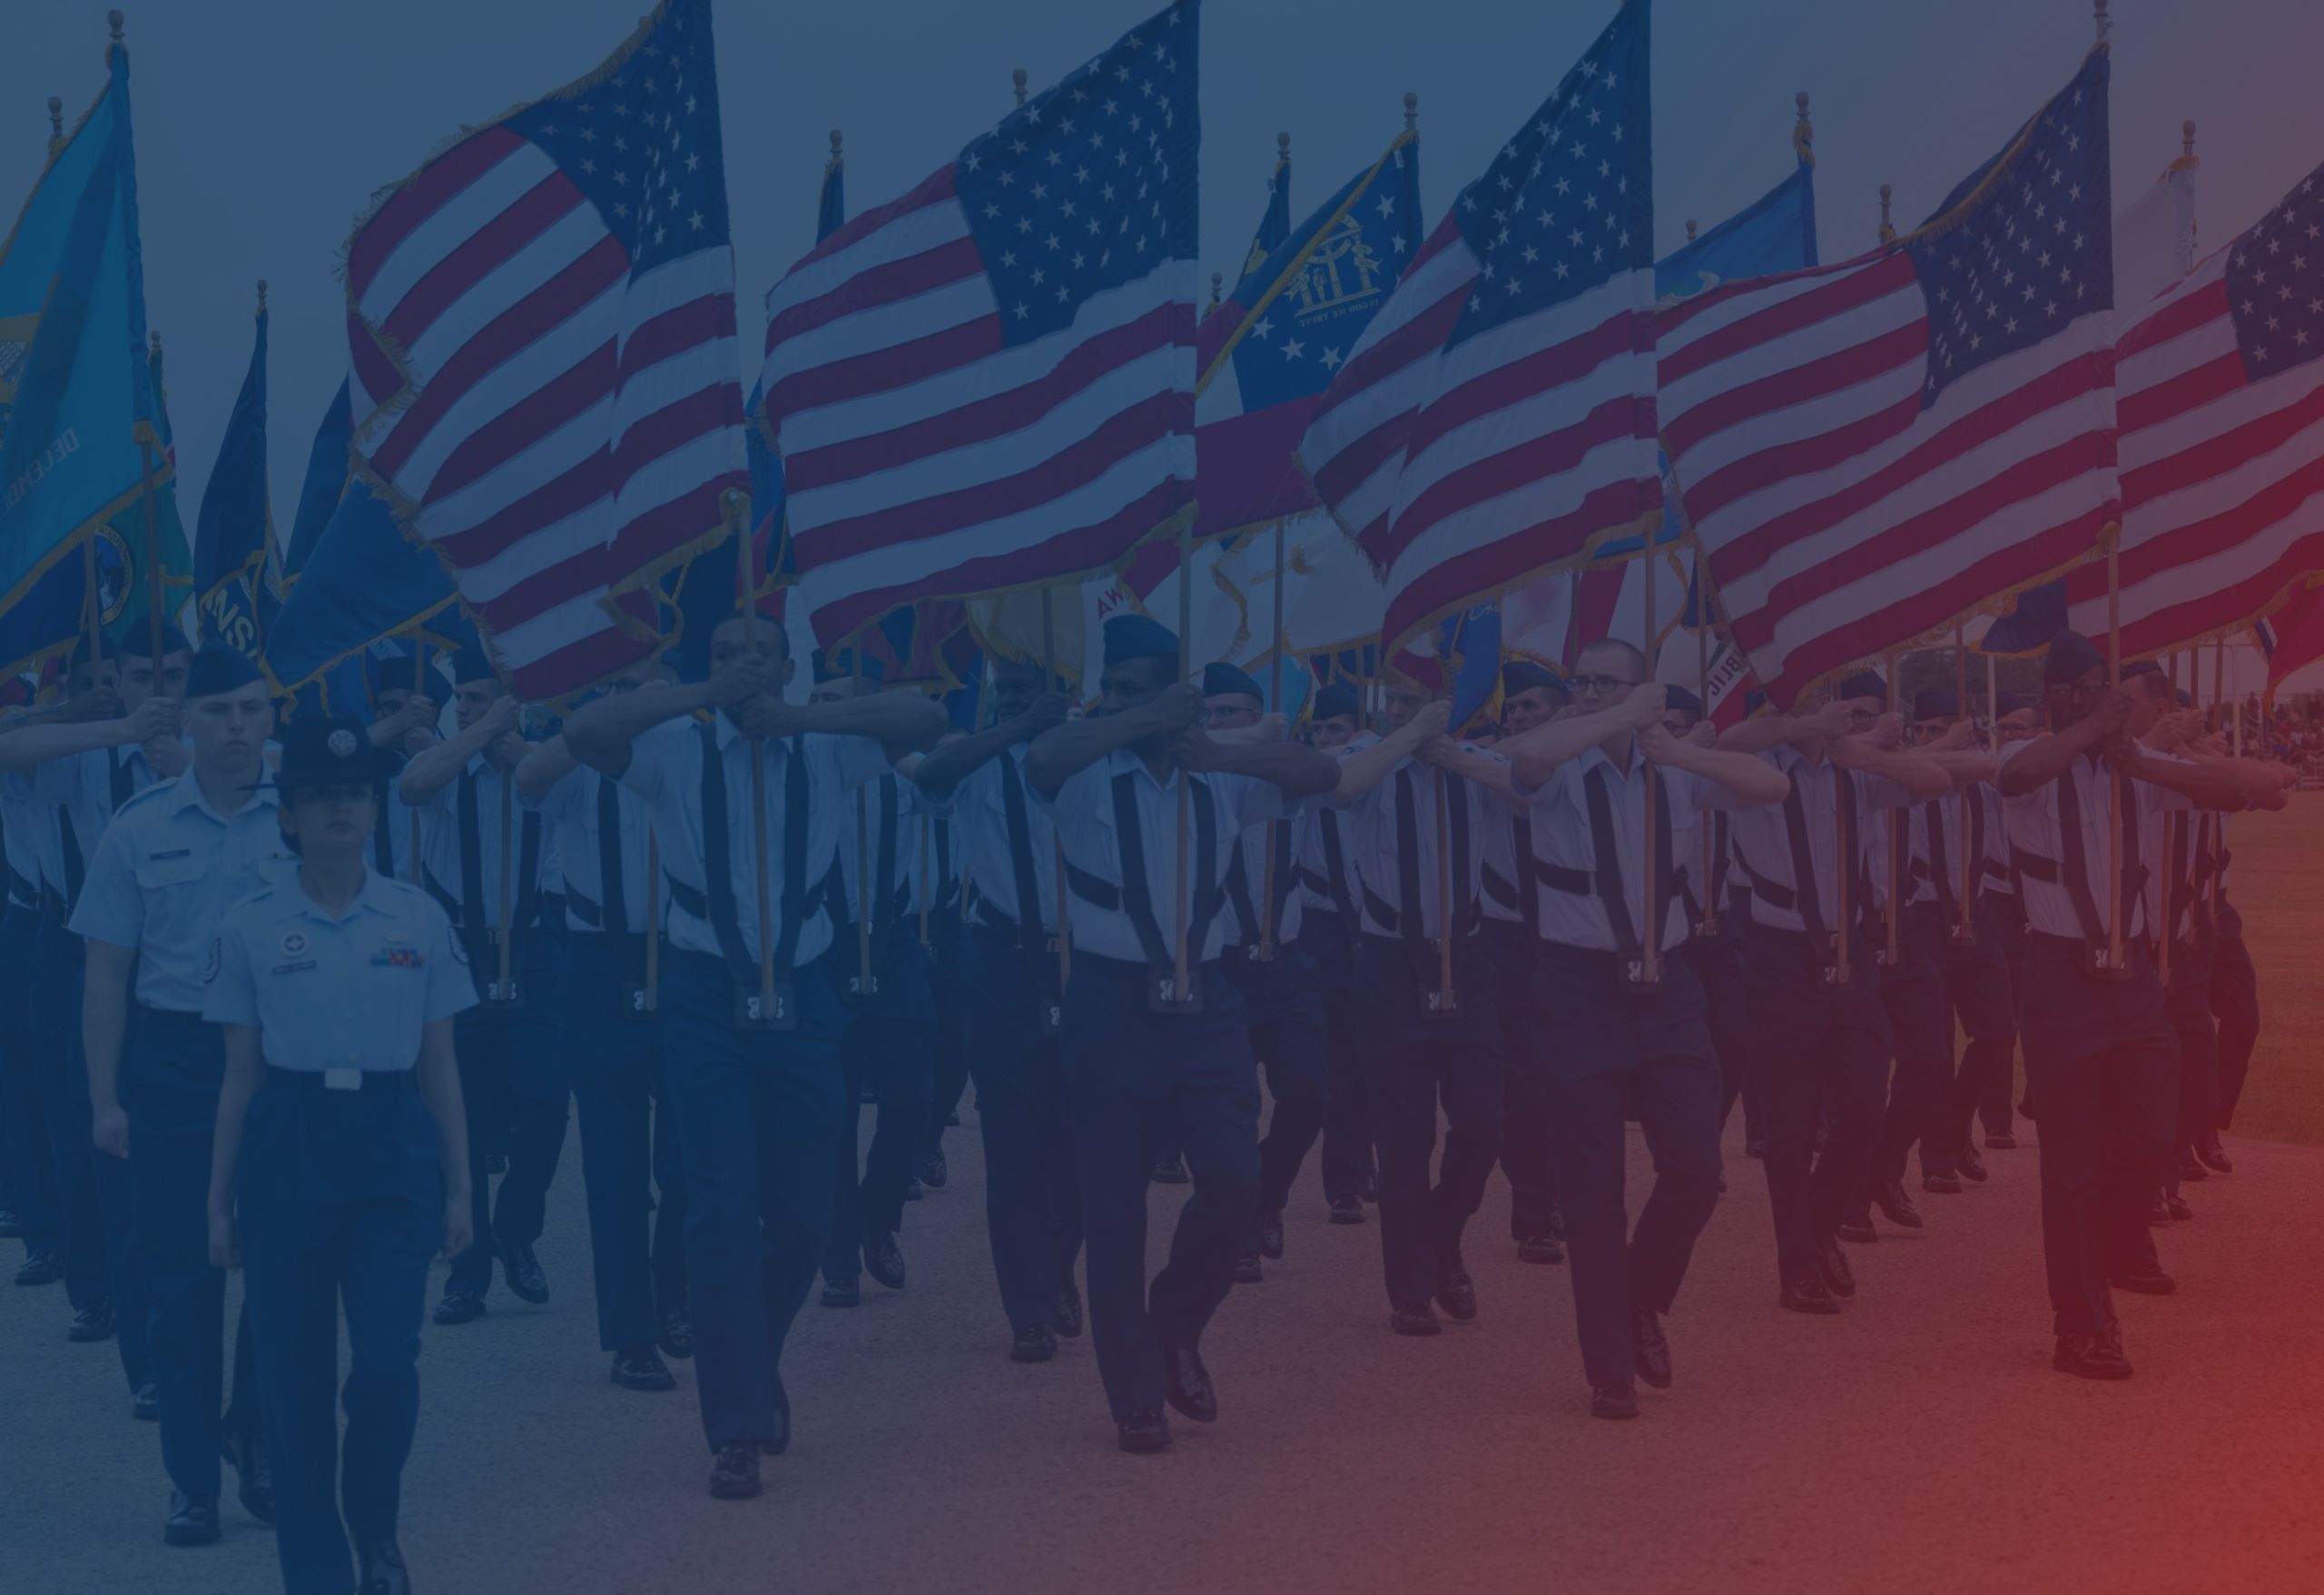 A parade of military veterans carrying American flags